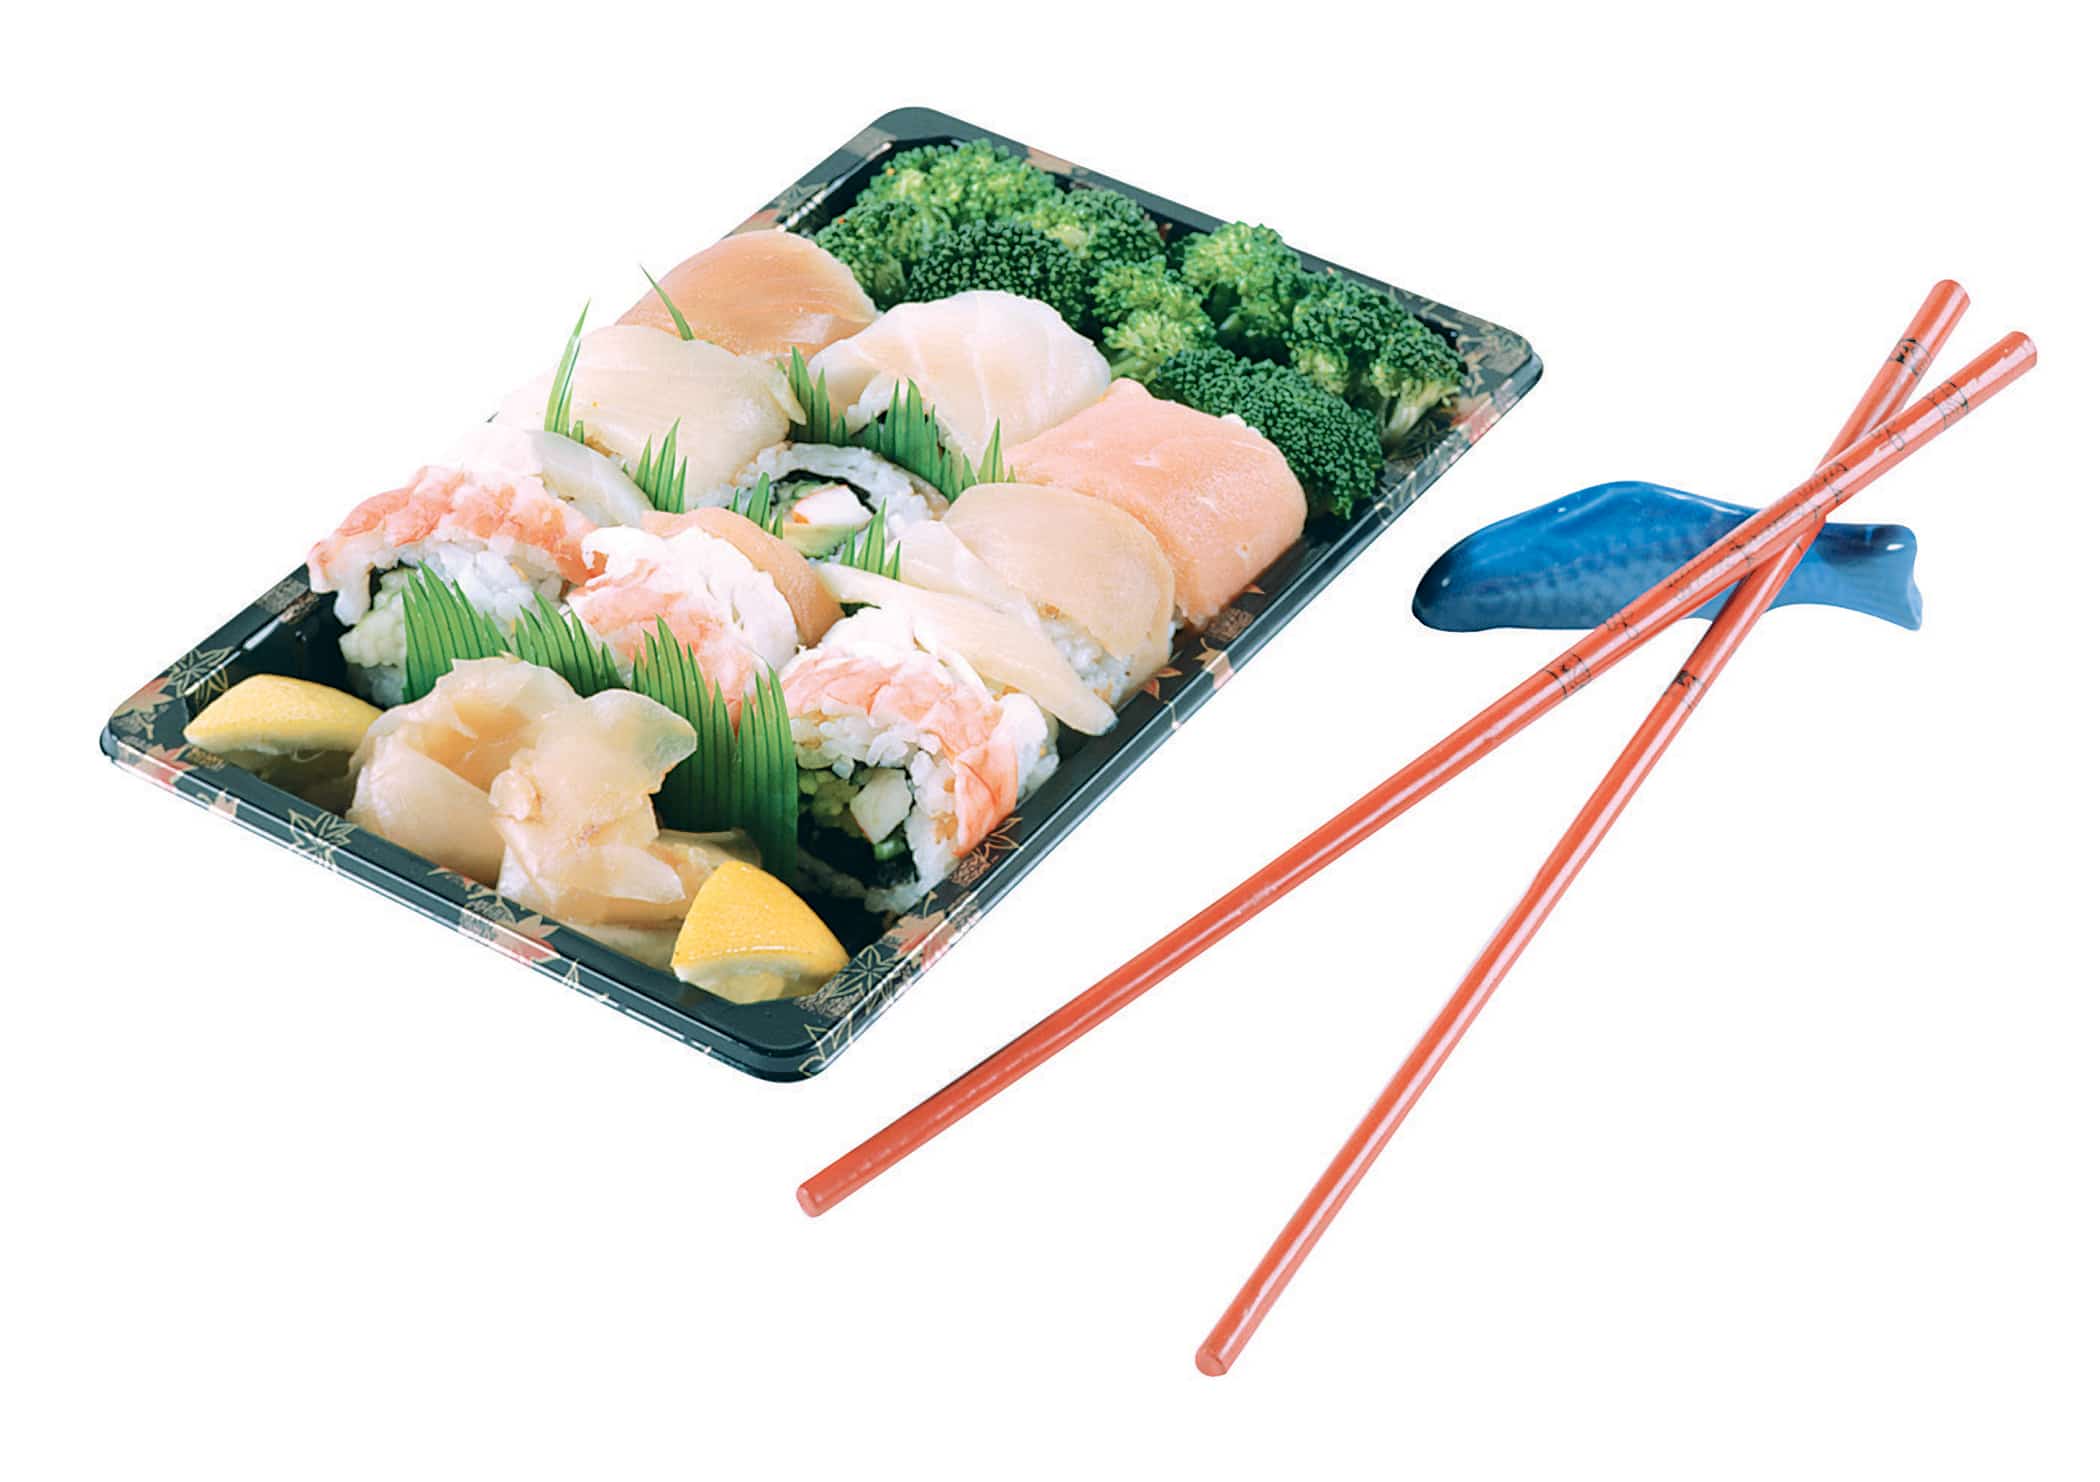 Raw Sushi in Tray with Red Chopsticks Food Picture